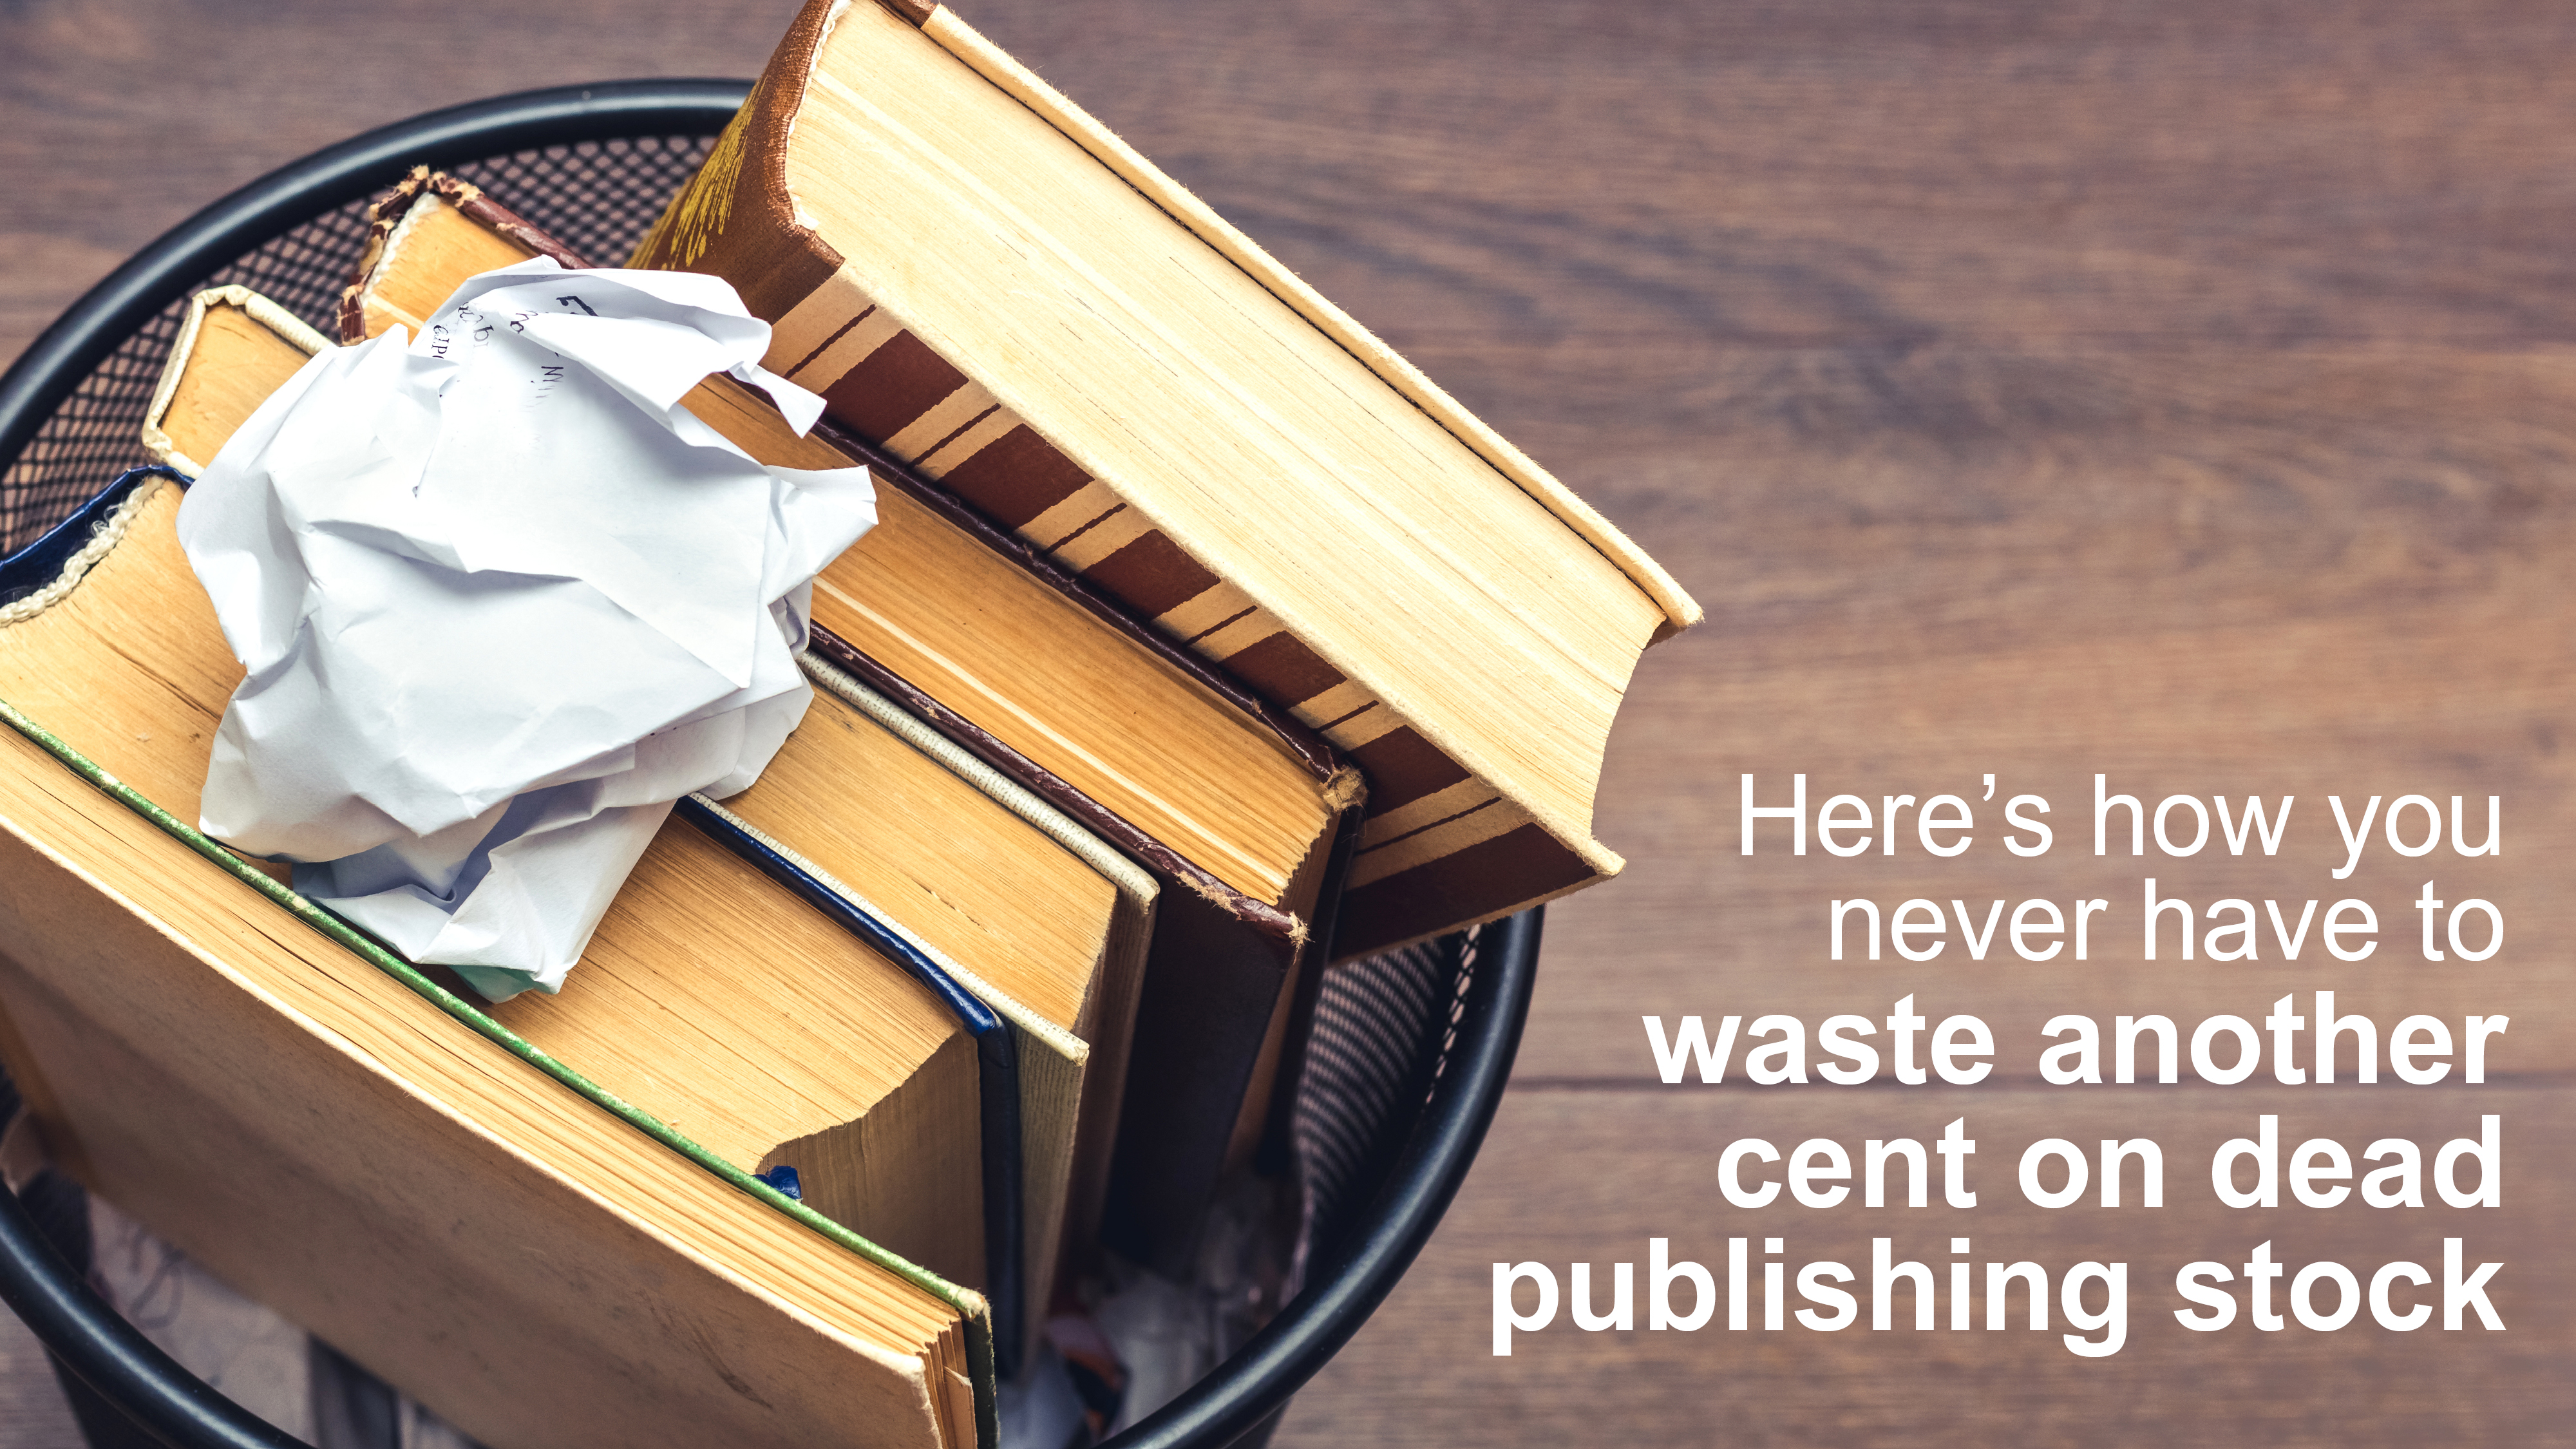 Here's how you never have to waste another cent on dead publishing stock